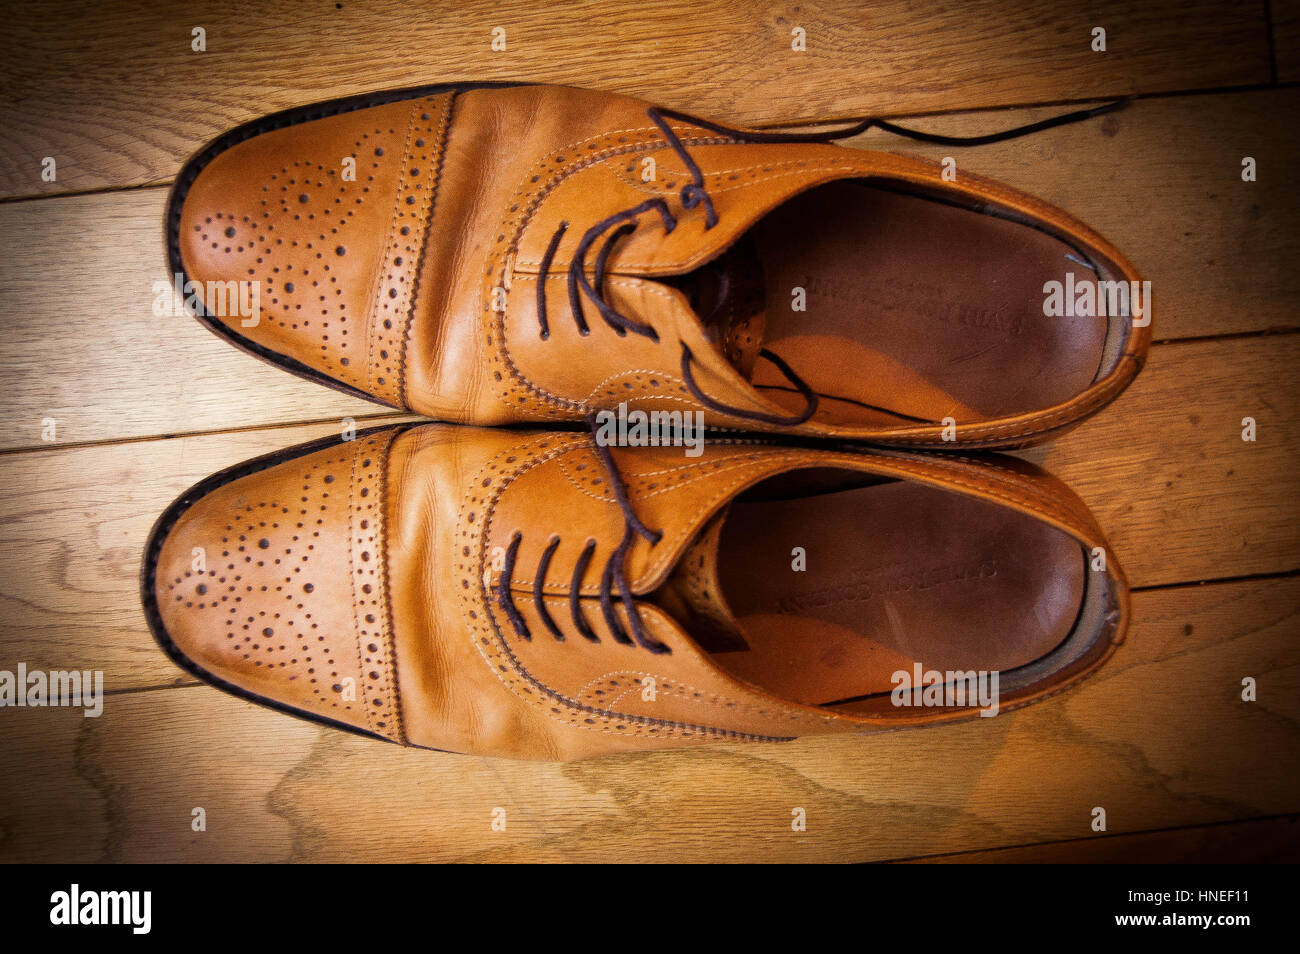 A pair of men's brown leather brogues on wooden flooring, shot from above, and one shoe toppled on its side. Stock Photo